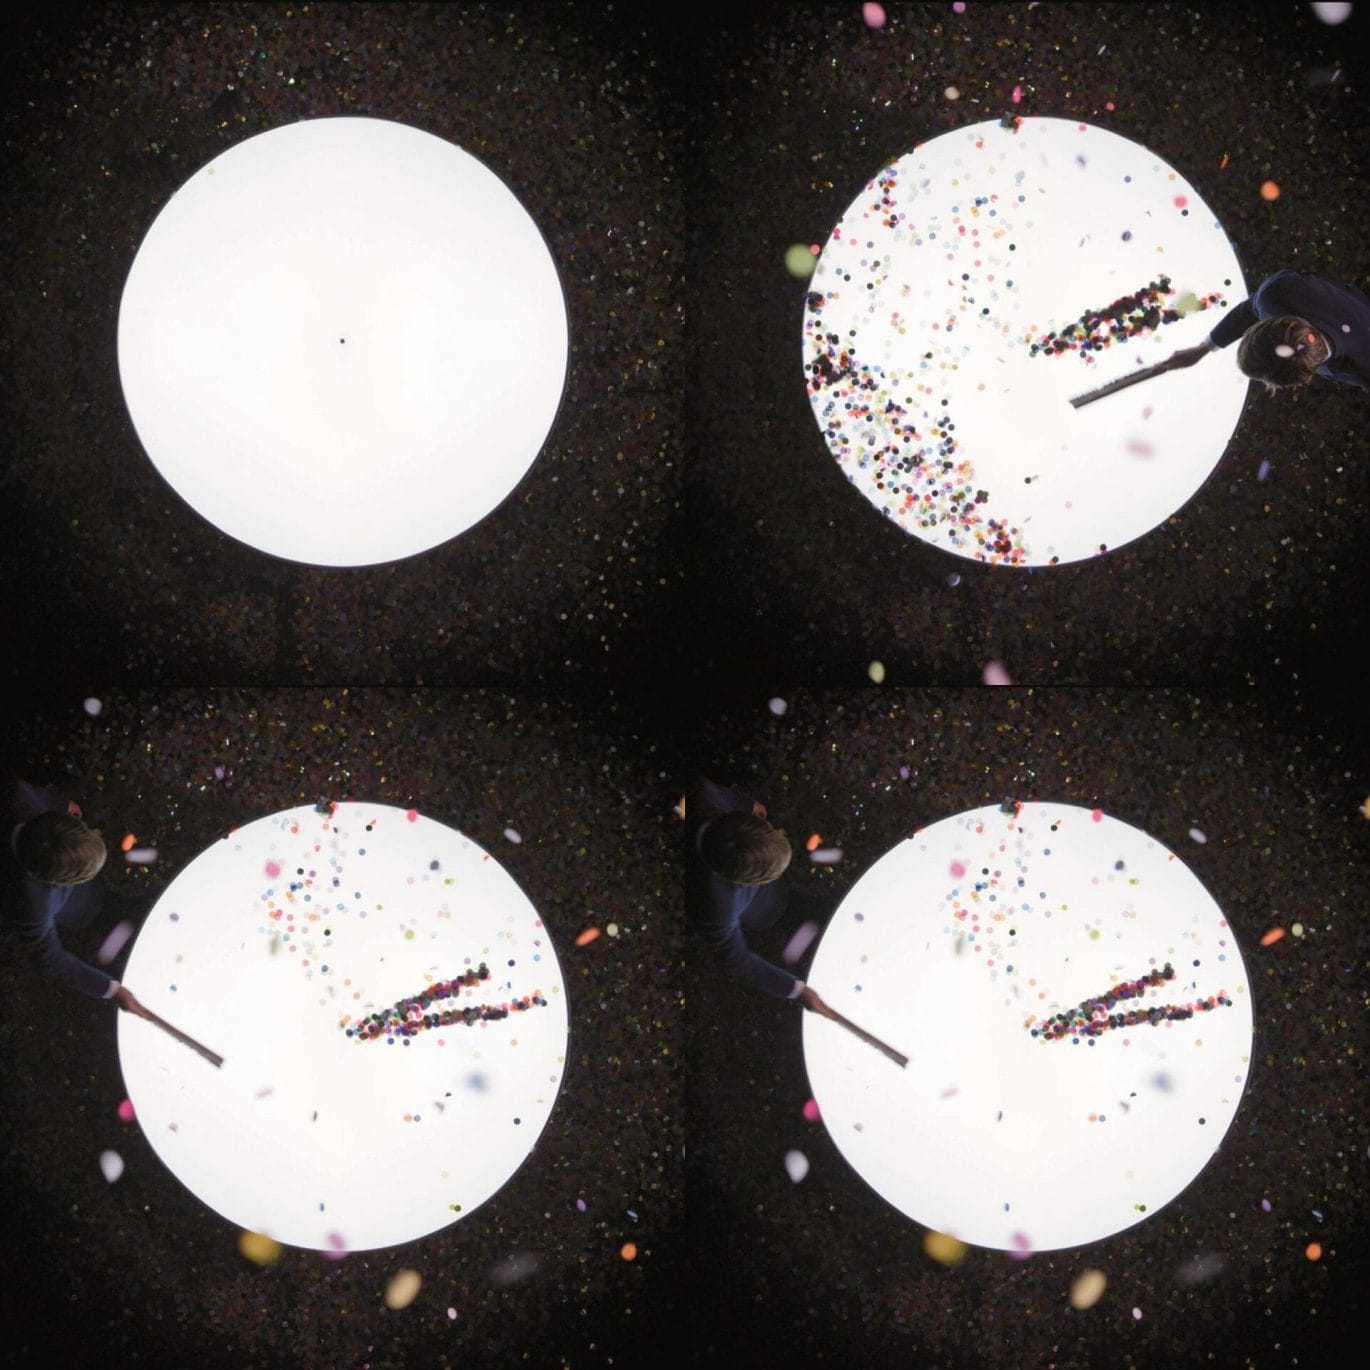 Stills Maarten Baas, Real Time Confetti Clock, 2020 Collection of the artist